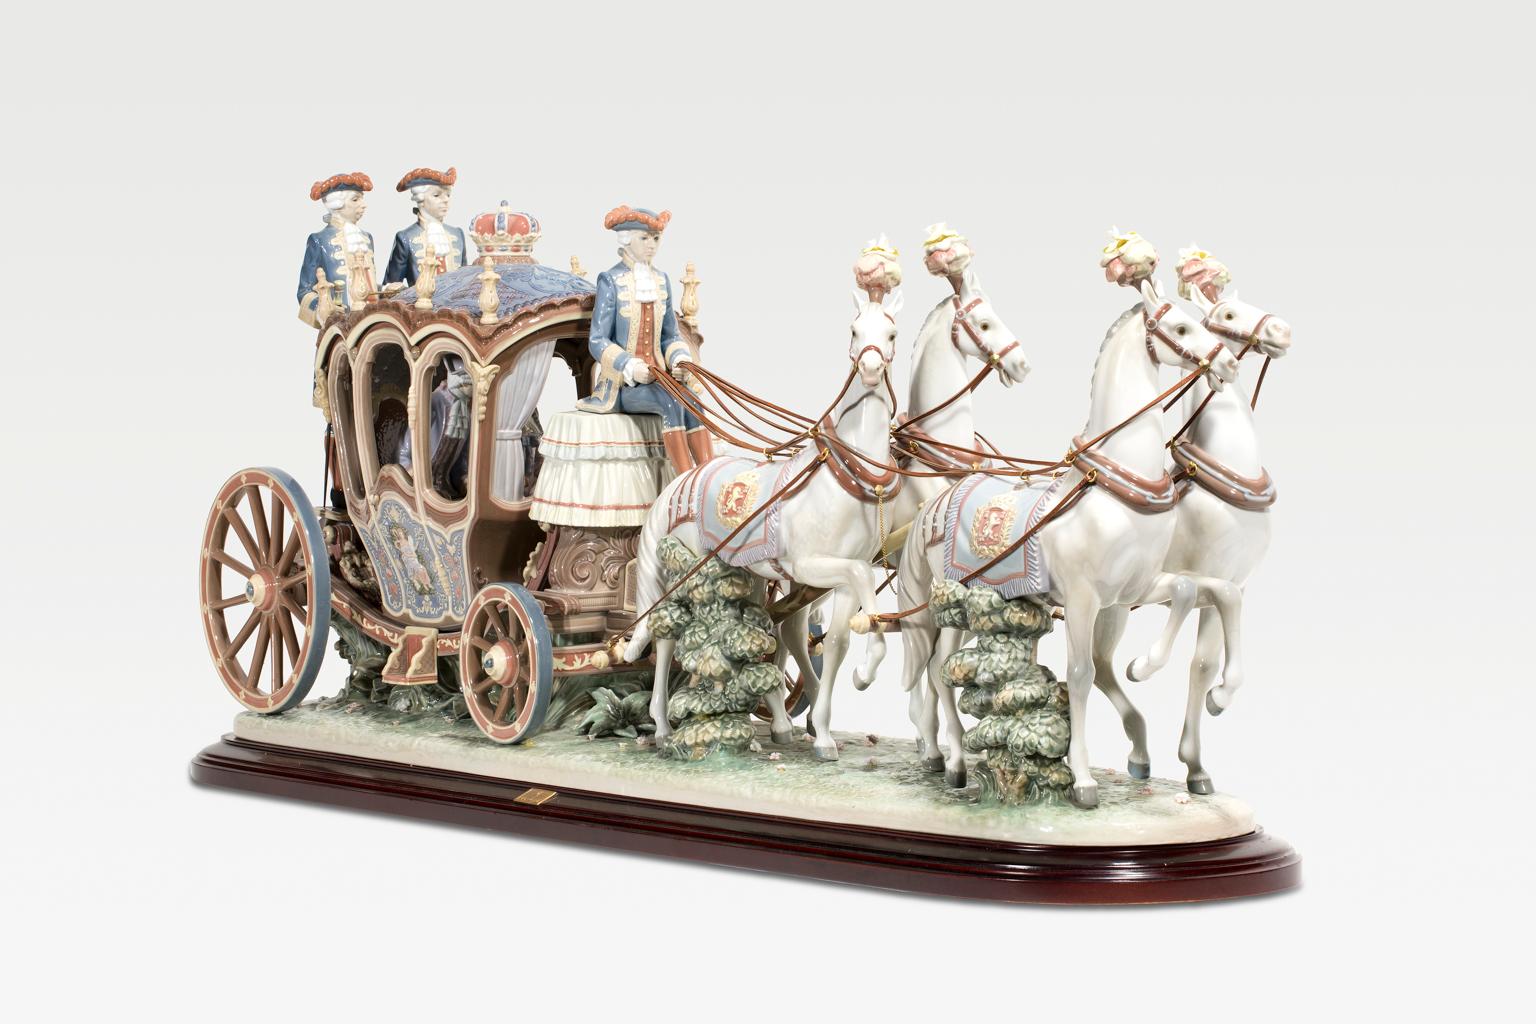 SALE ONE WEEK ONLY

“Carroza Siglo XVIII” is the Spanish name for this exquisitely rendered 18th century coach by the Spanish sculptor, Francisco Catala, a work that retails new for $48,000. The finish is High Porcelain and the colors though rich